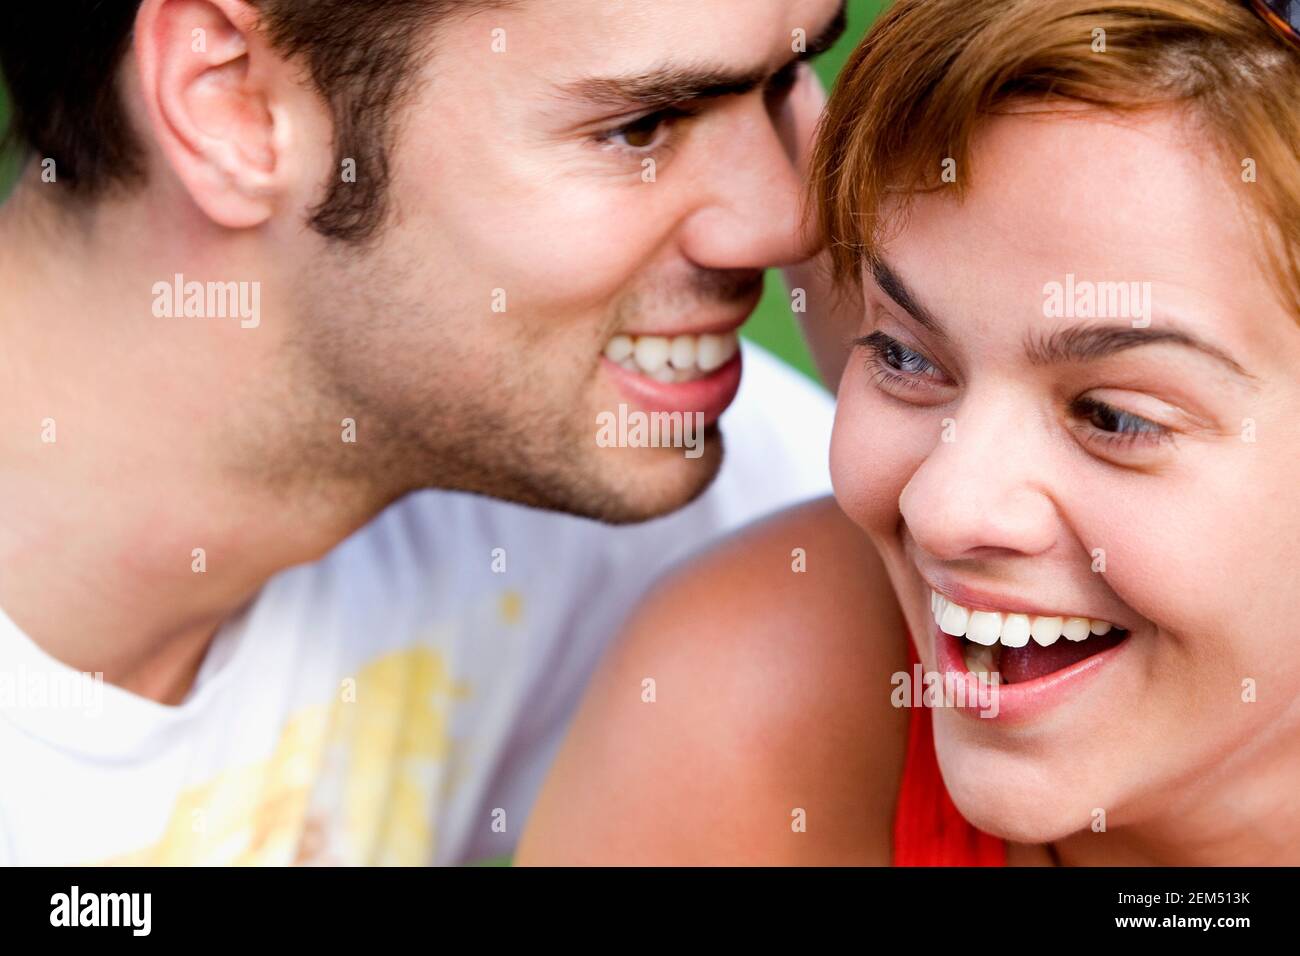 Close-up of a young couple smiling Stock Photo